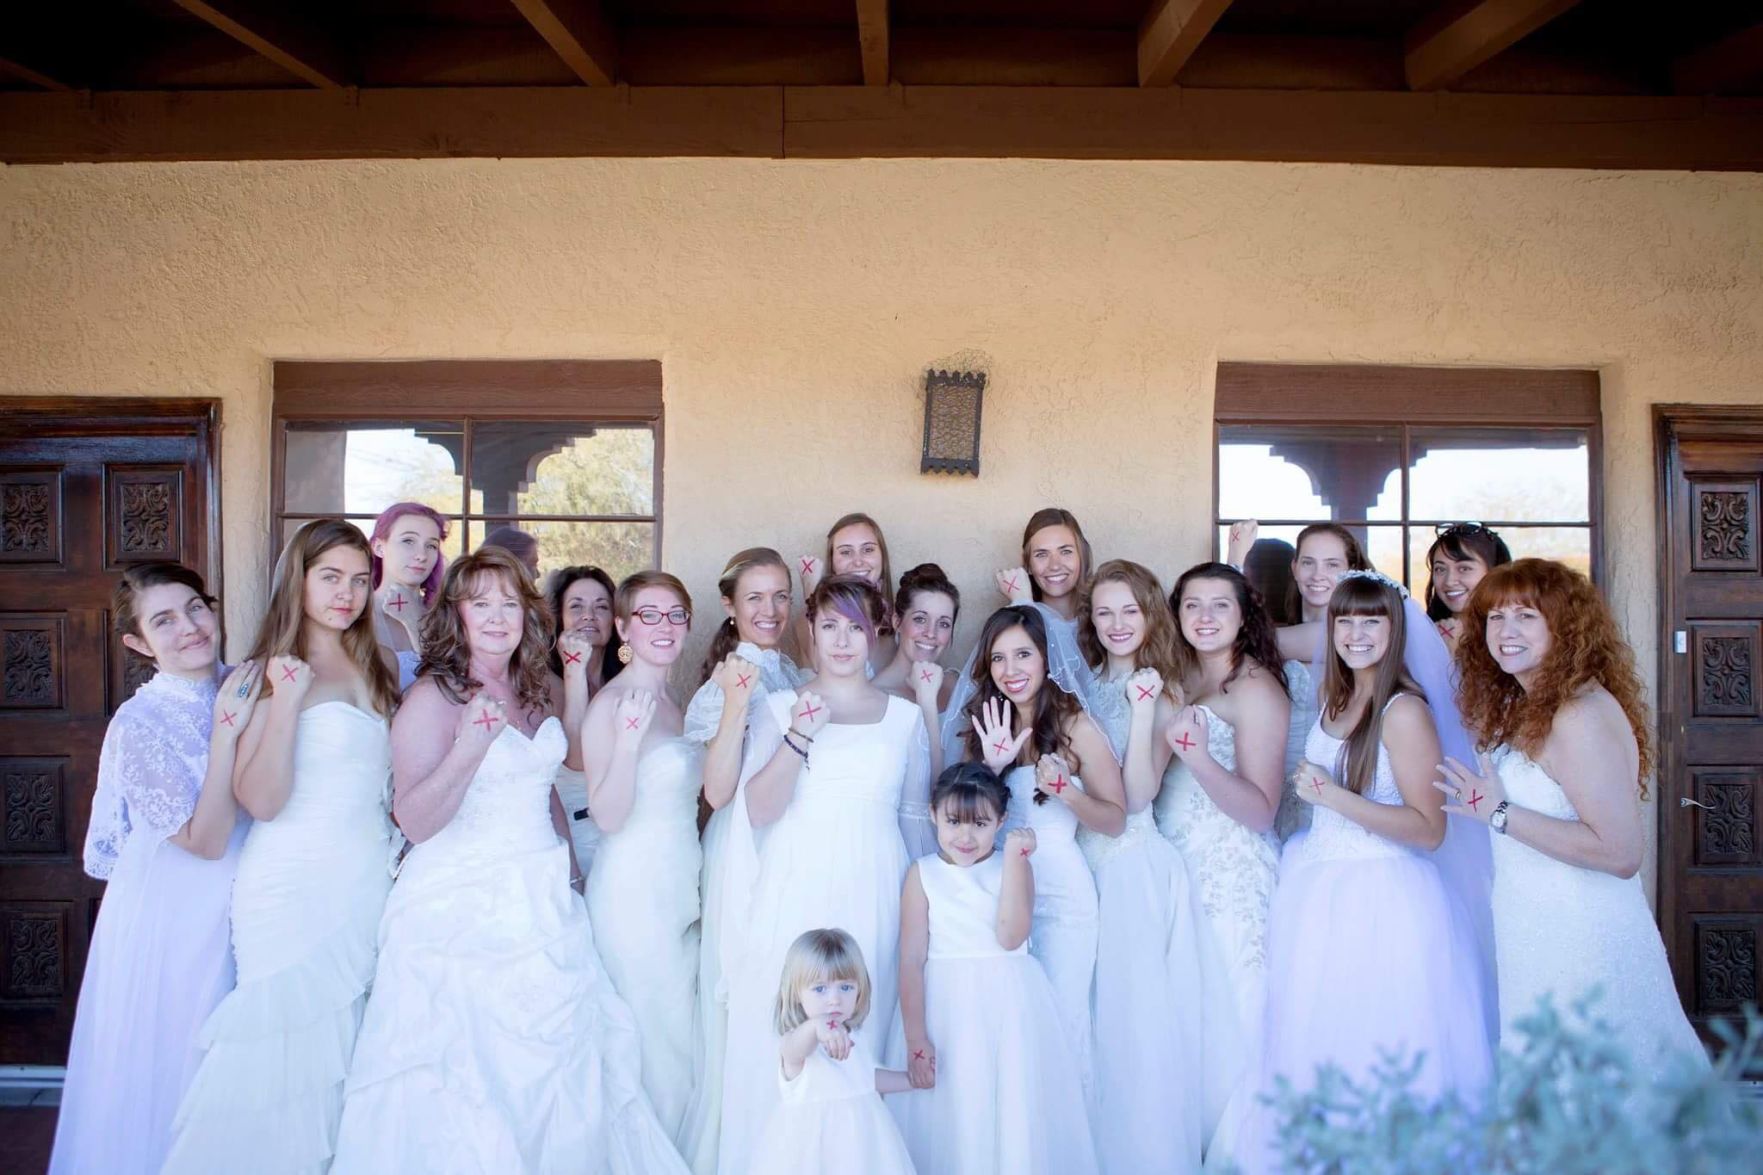 Why were these Tucson women wearing wedding dresses and an ❌ ? tucson life tucson